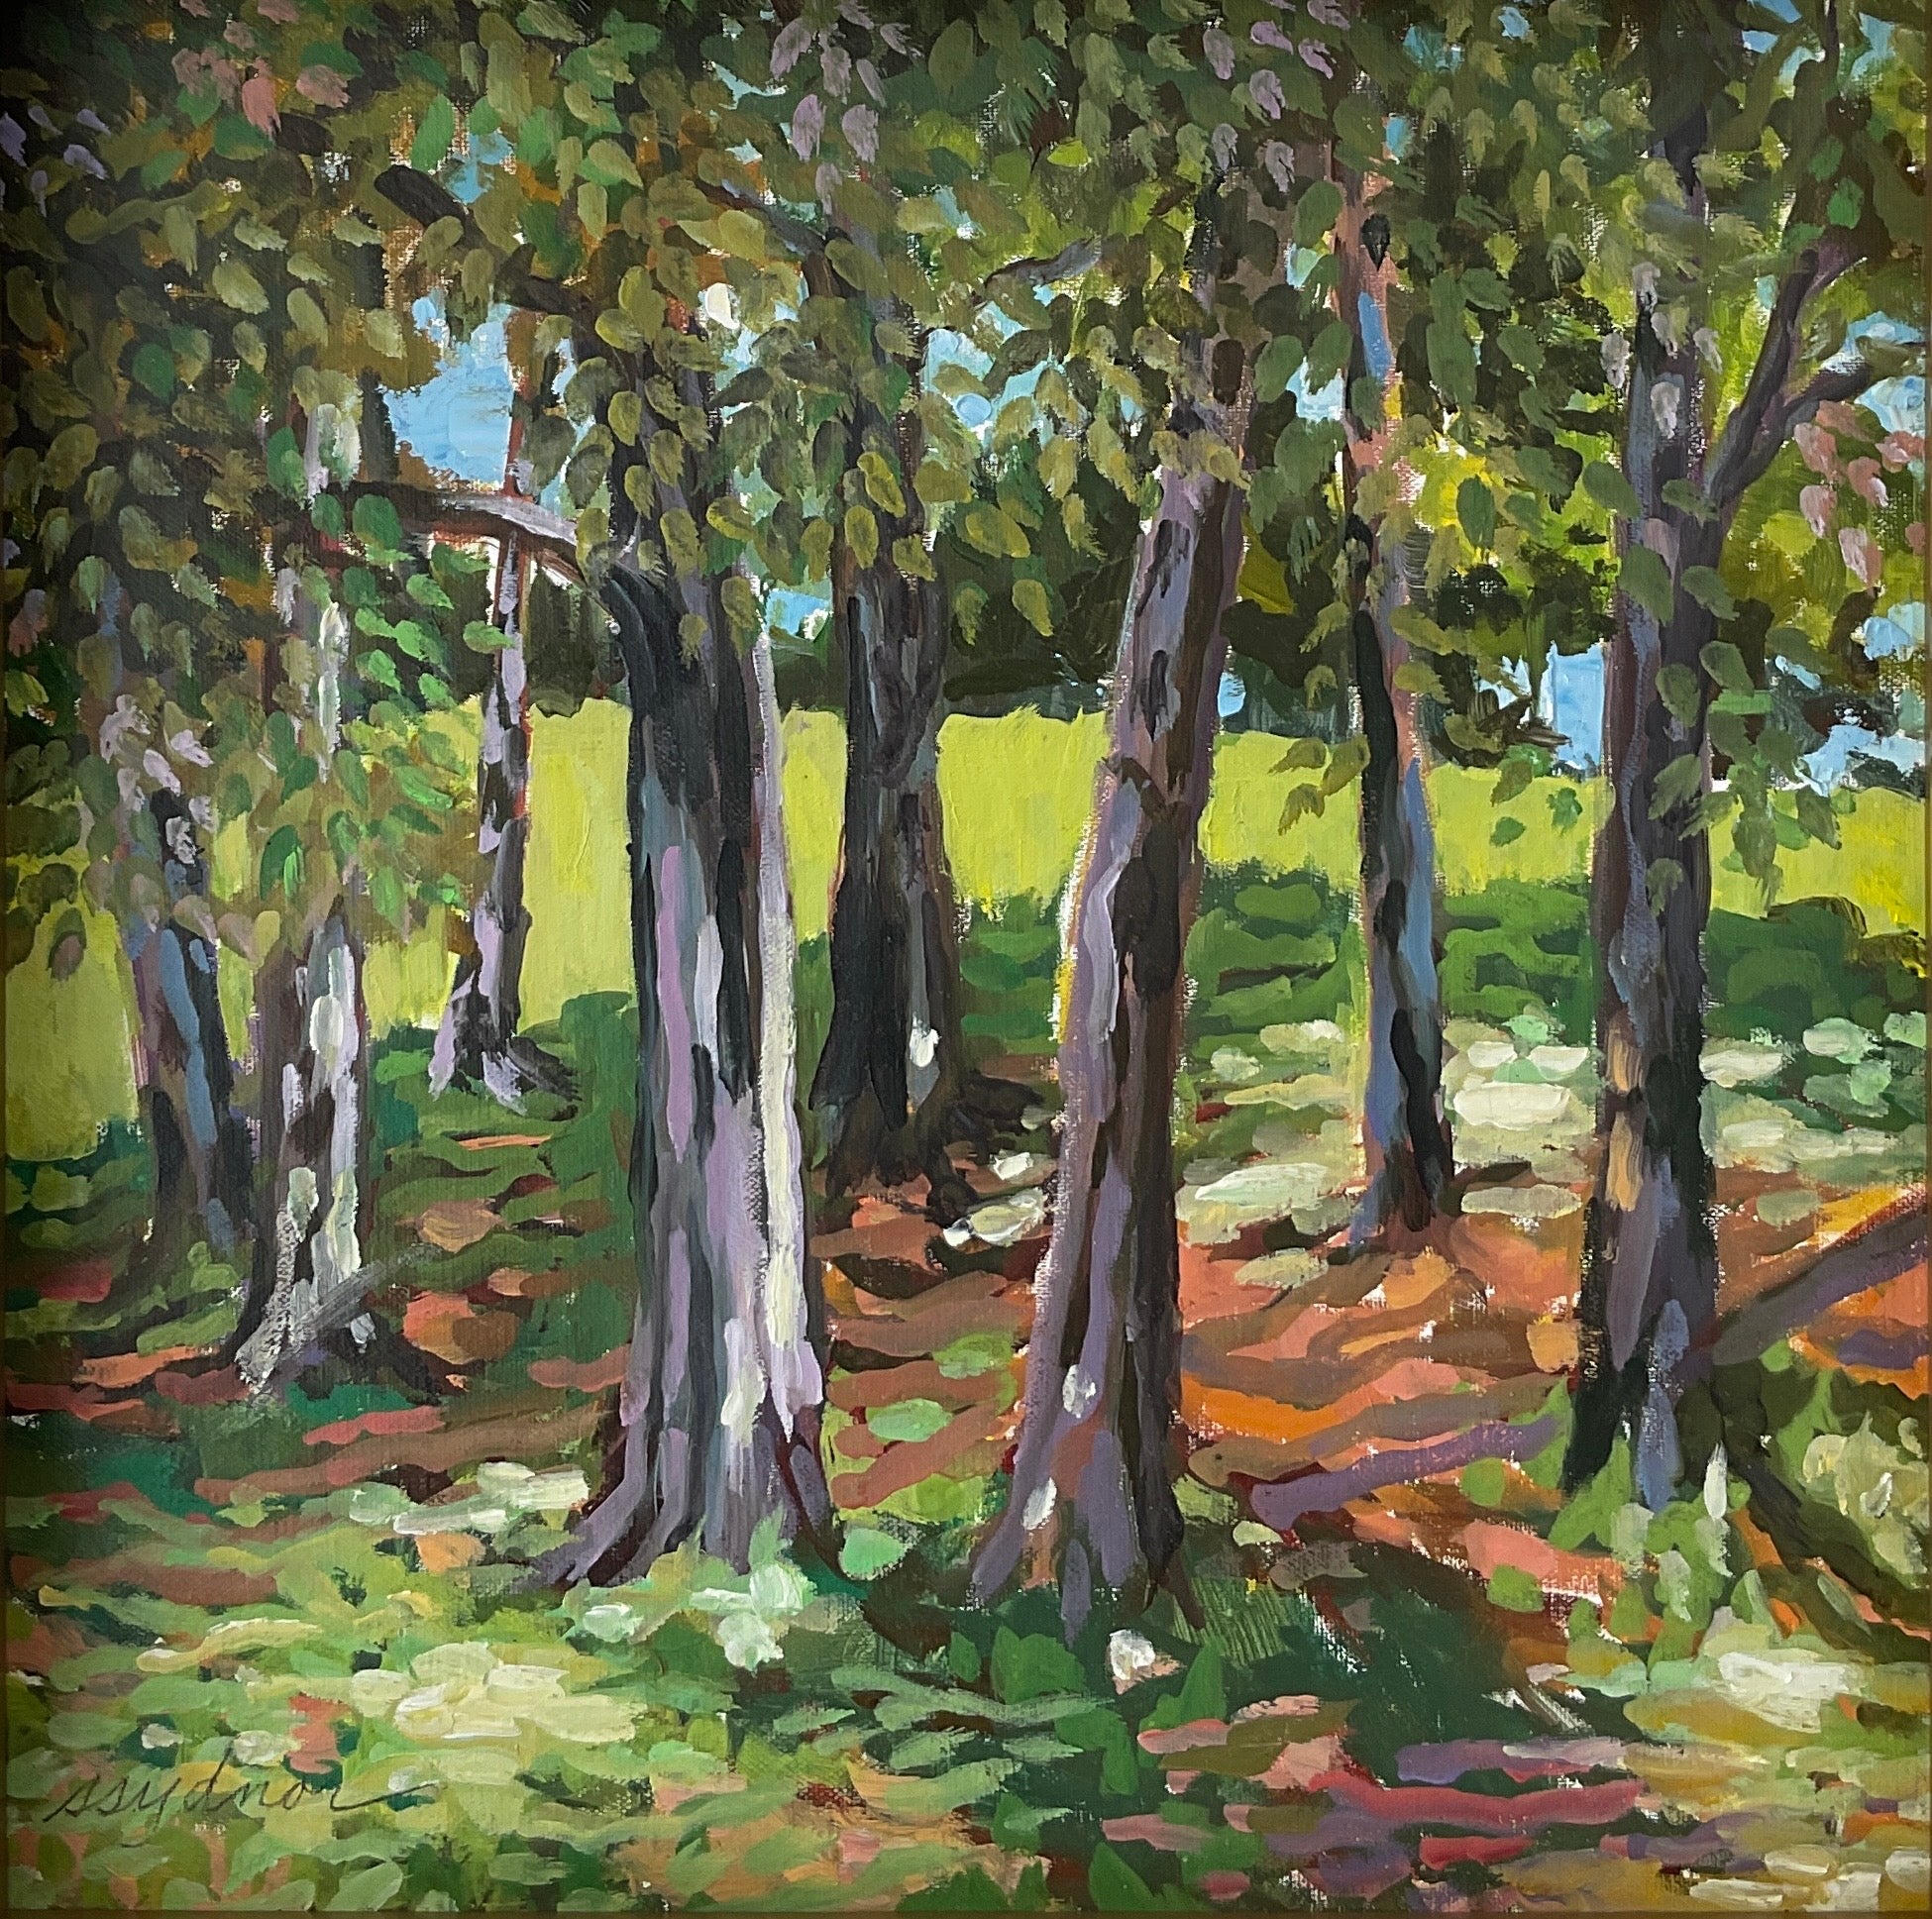 Trees in the Park